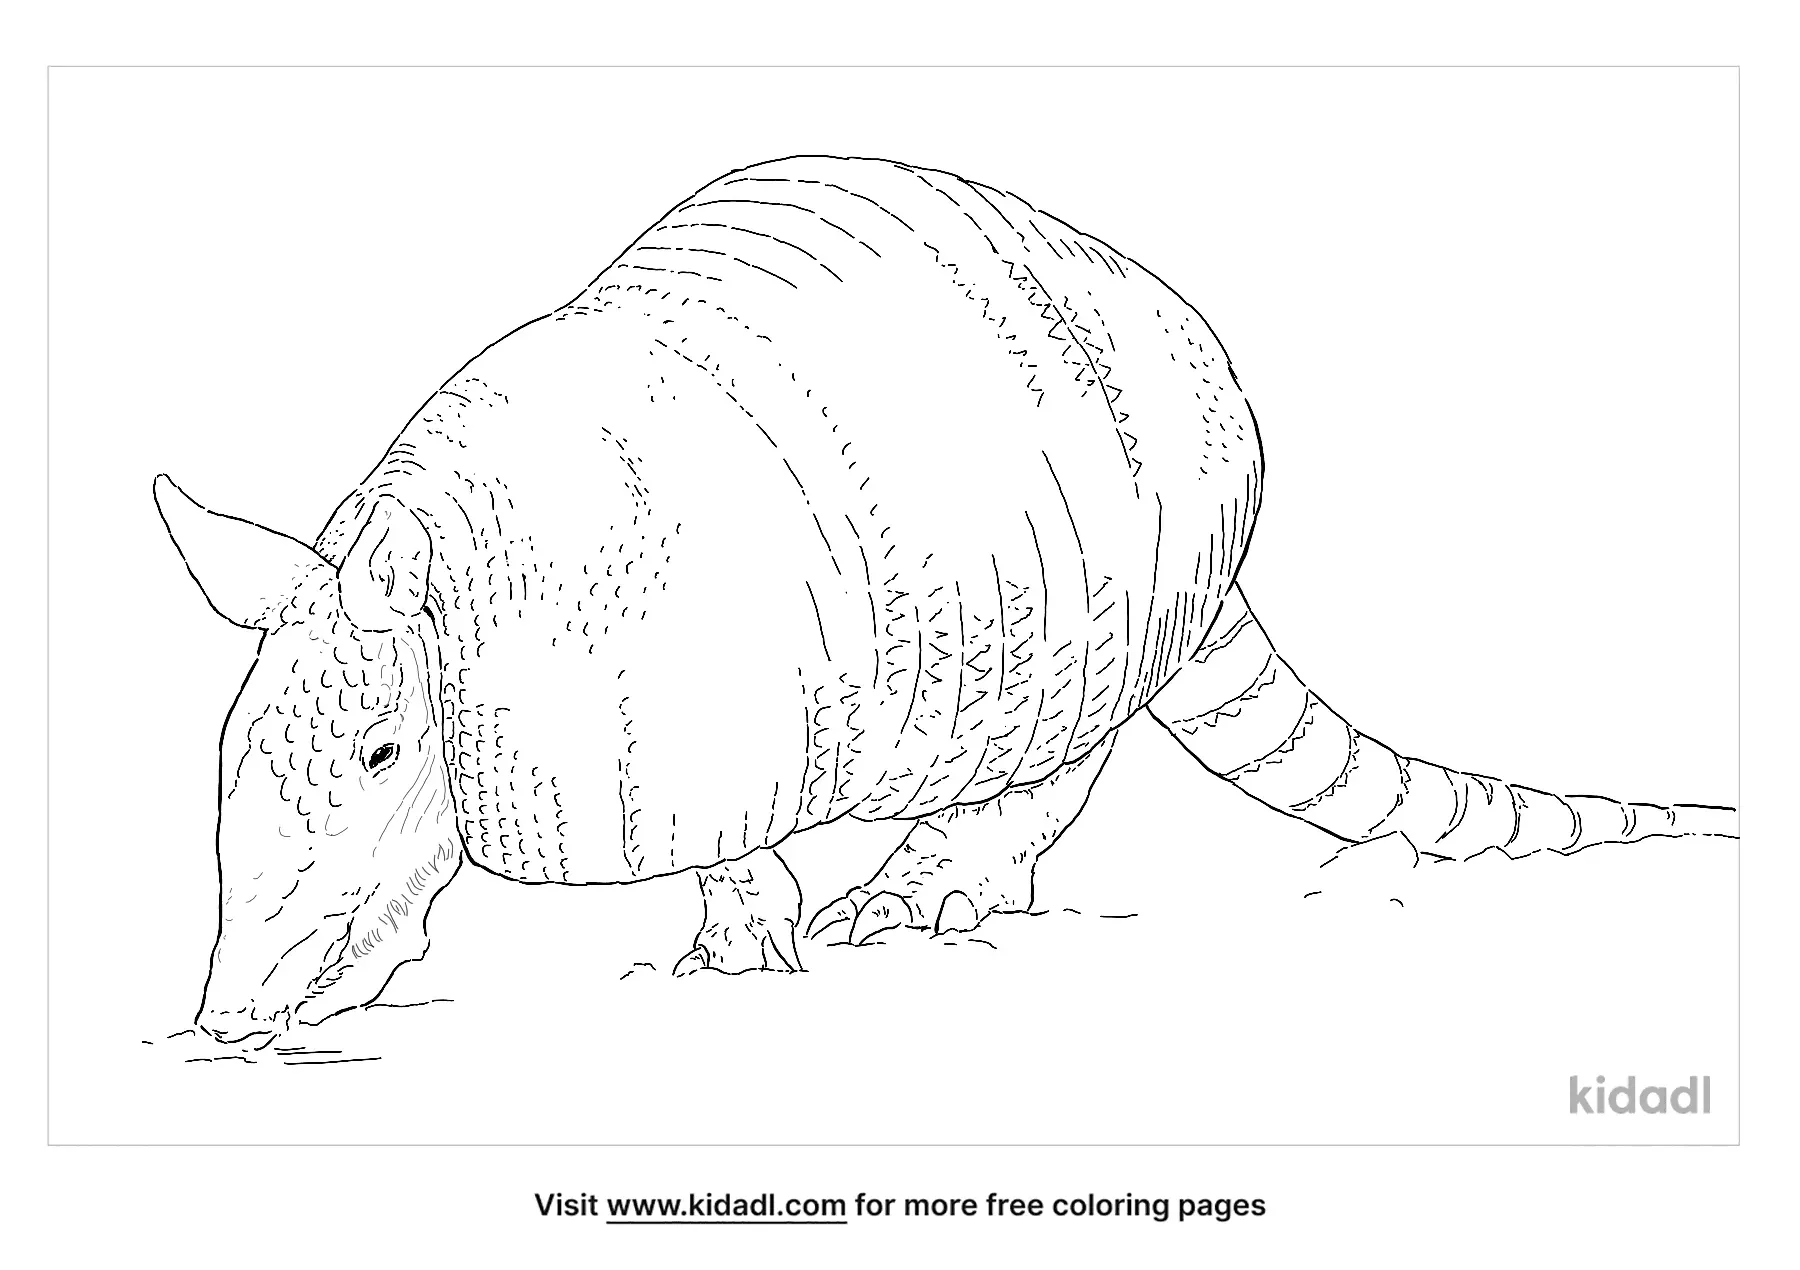 Eastern Woodrat Coloring Page | Free Mammals Coloring Page | Kidadl